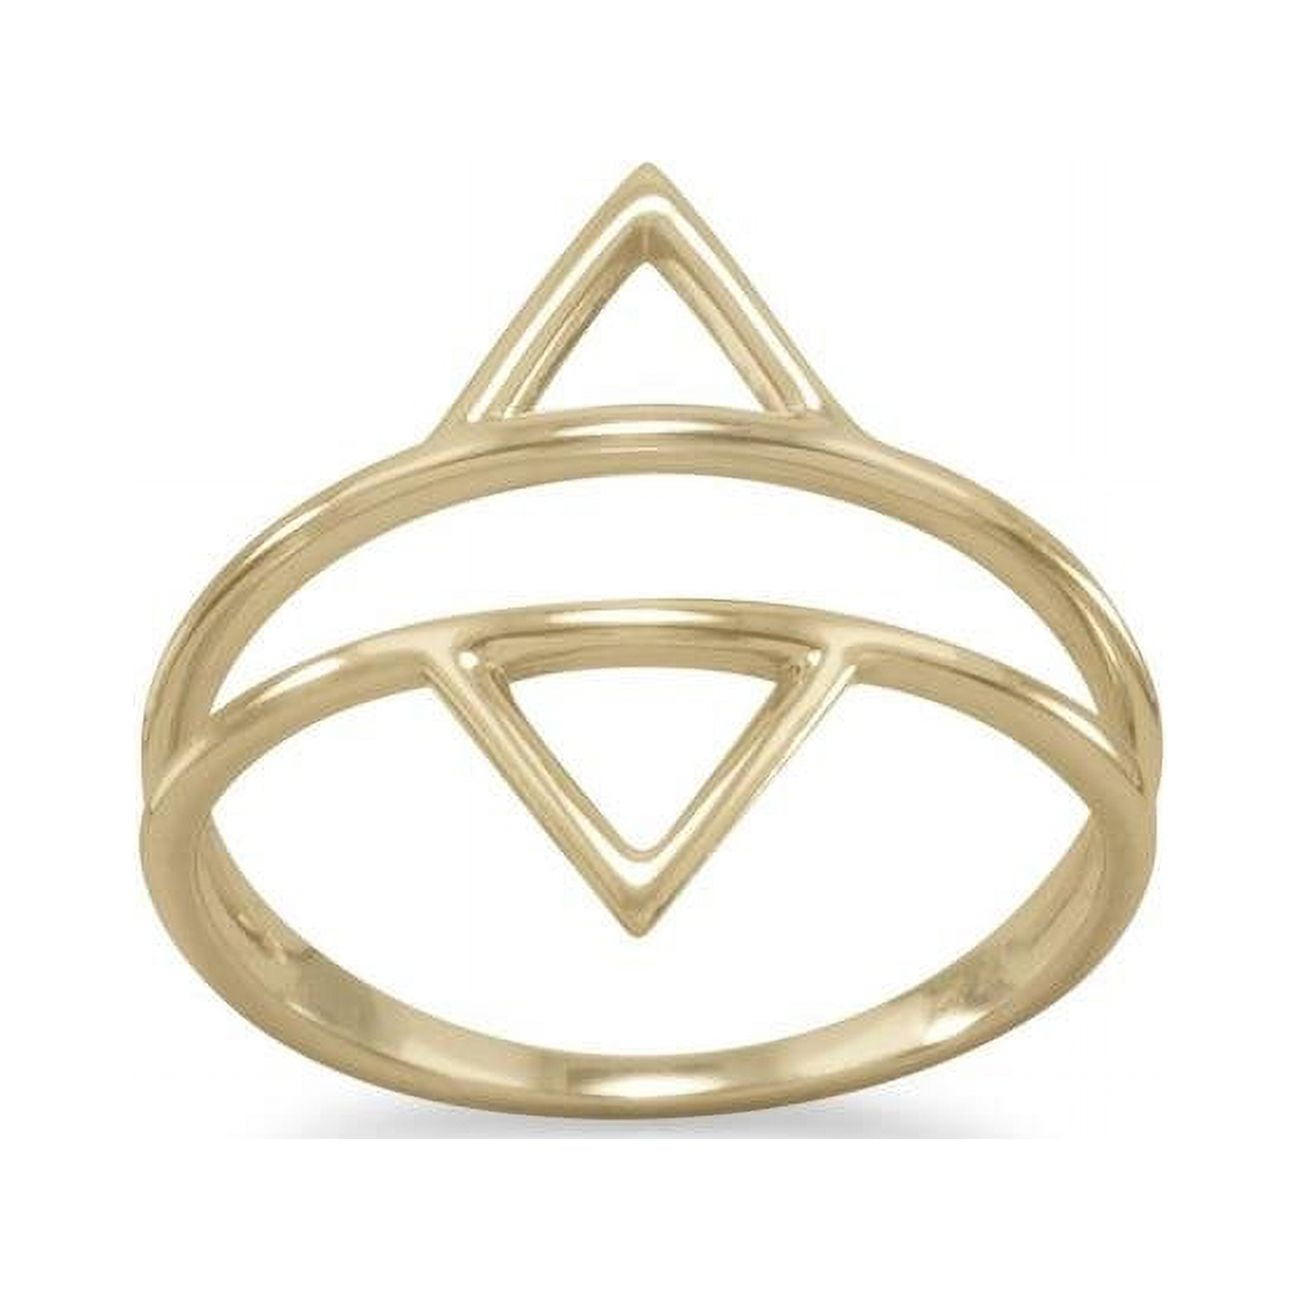 83697-5 14k Gold Plated Double Triangle Ring - Size 5